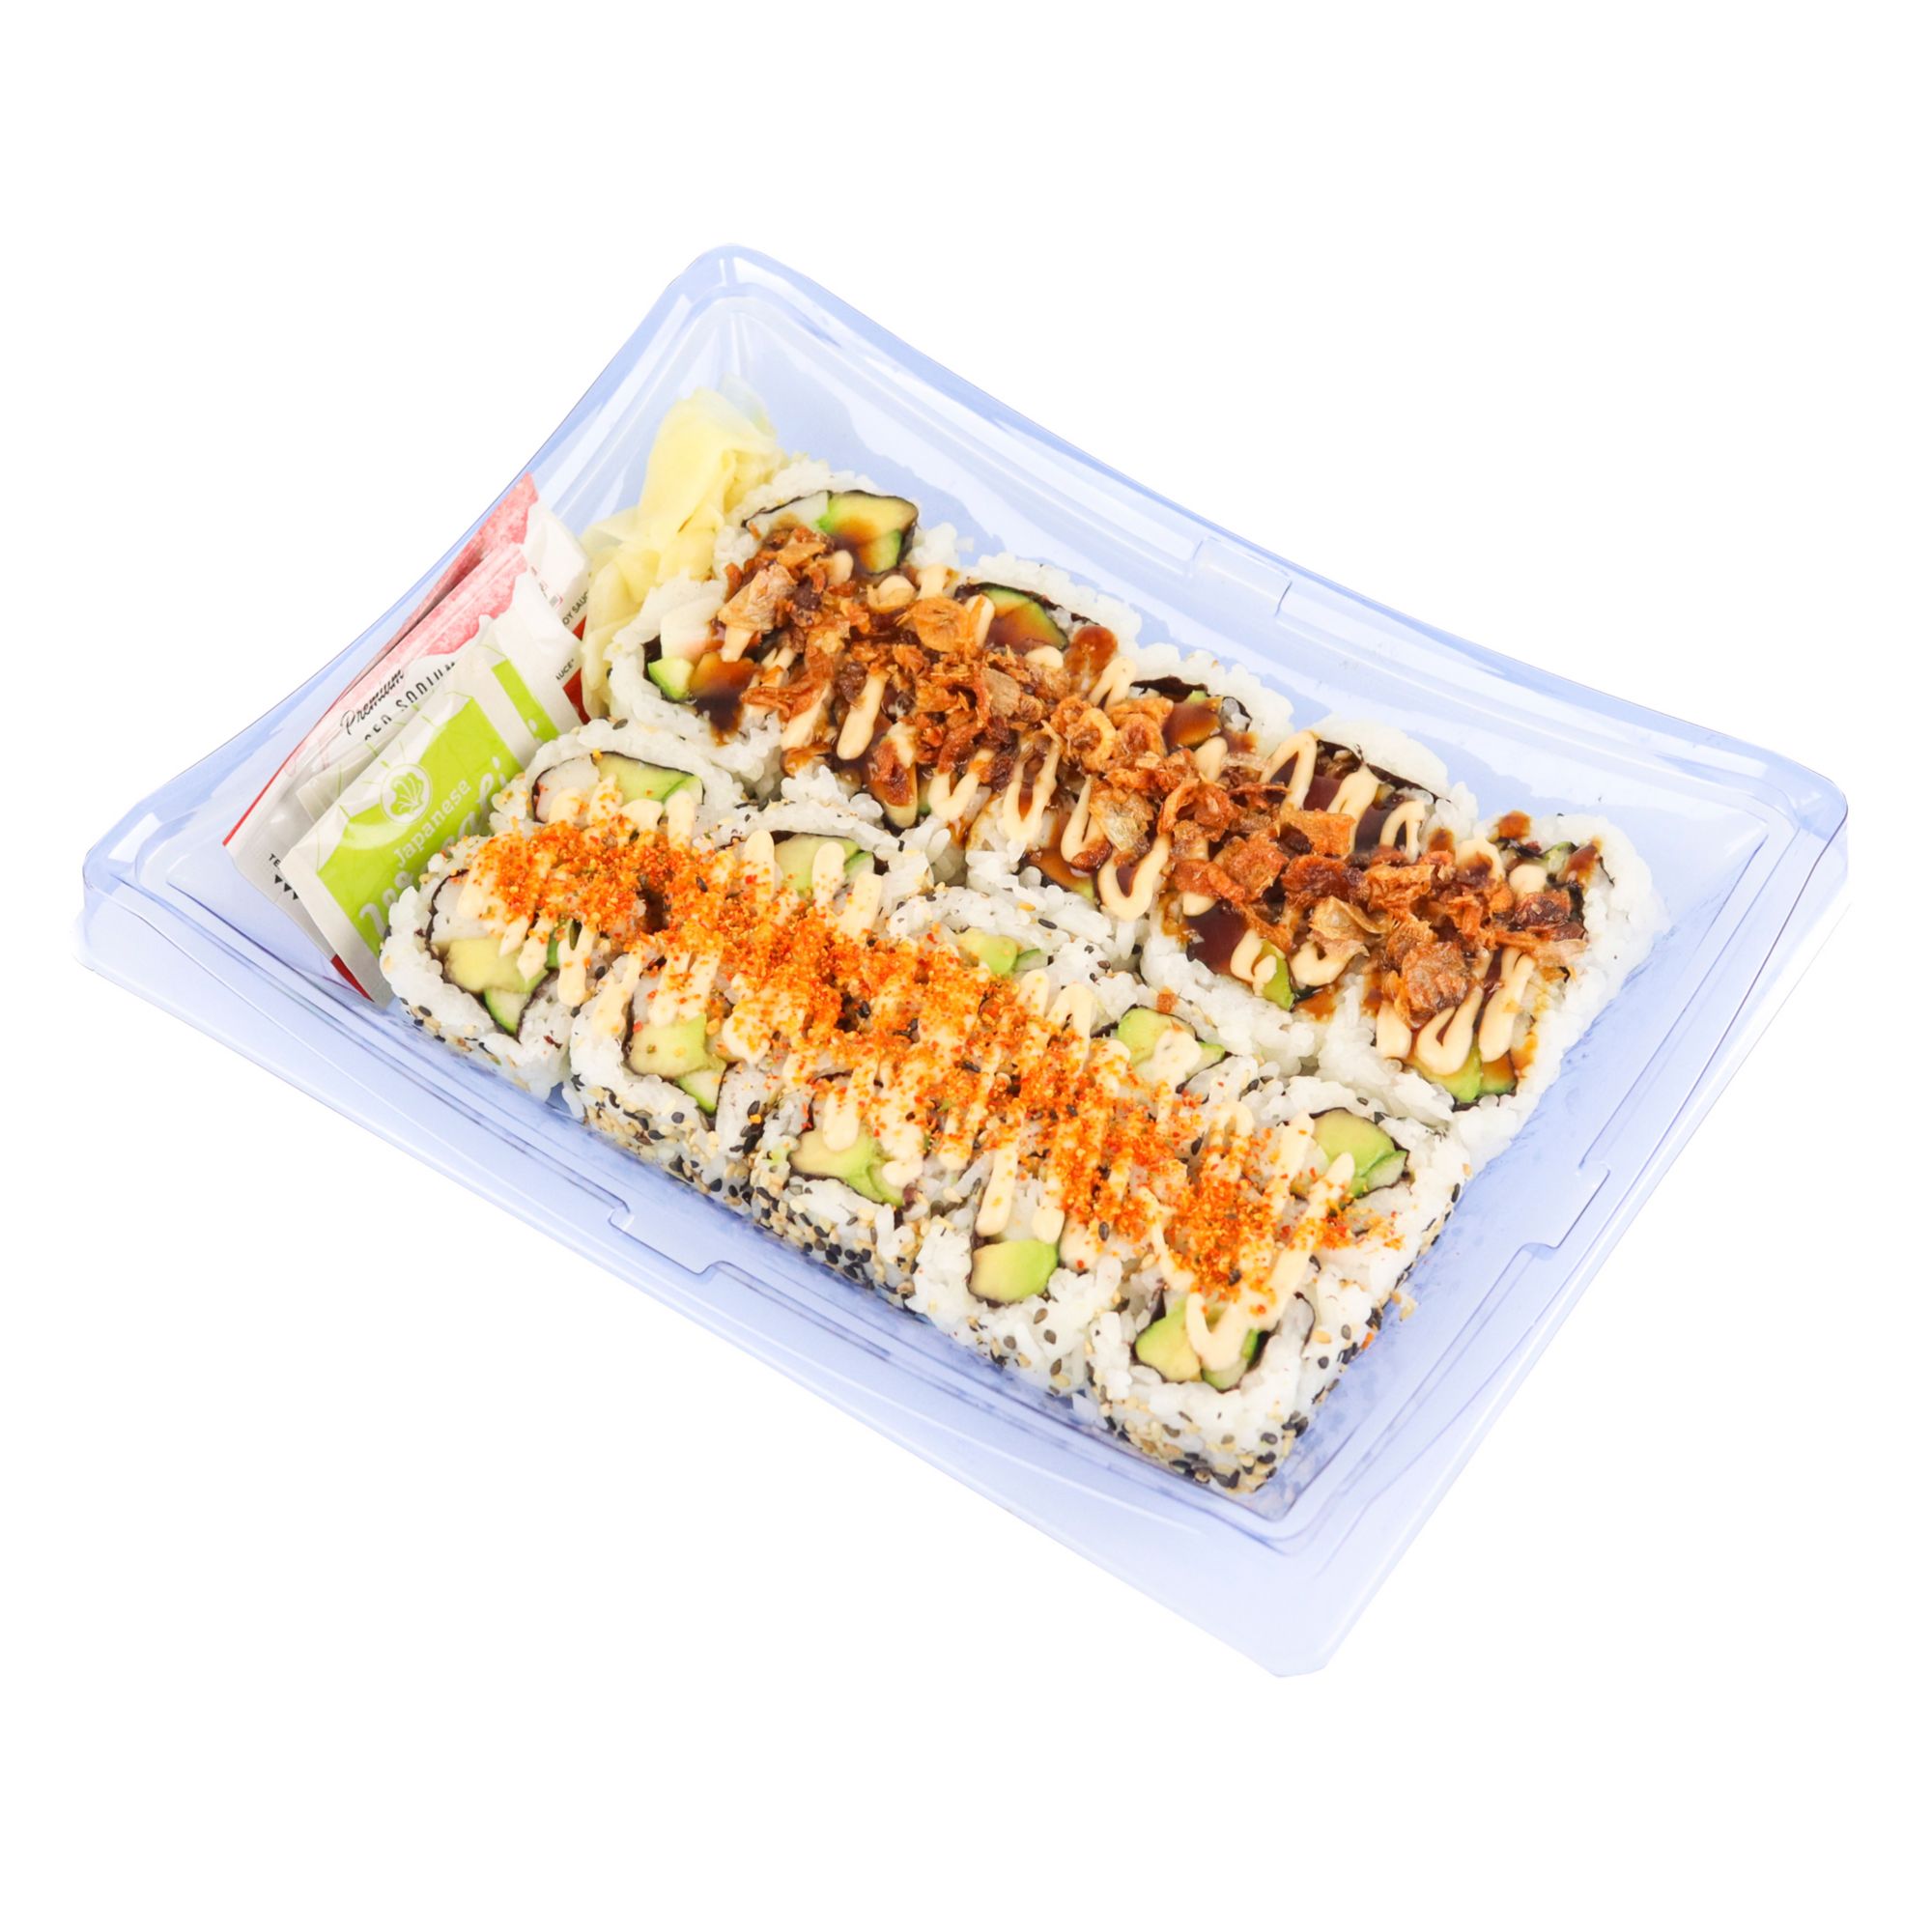 Wholesale Sushi Making Kit Products at Factory Prices from